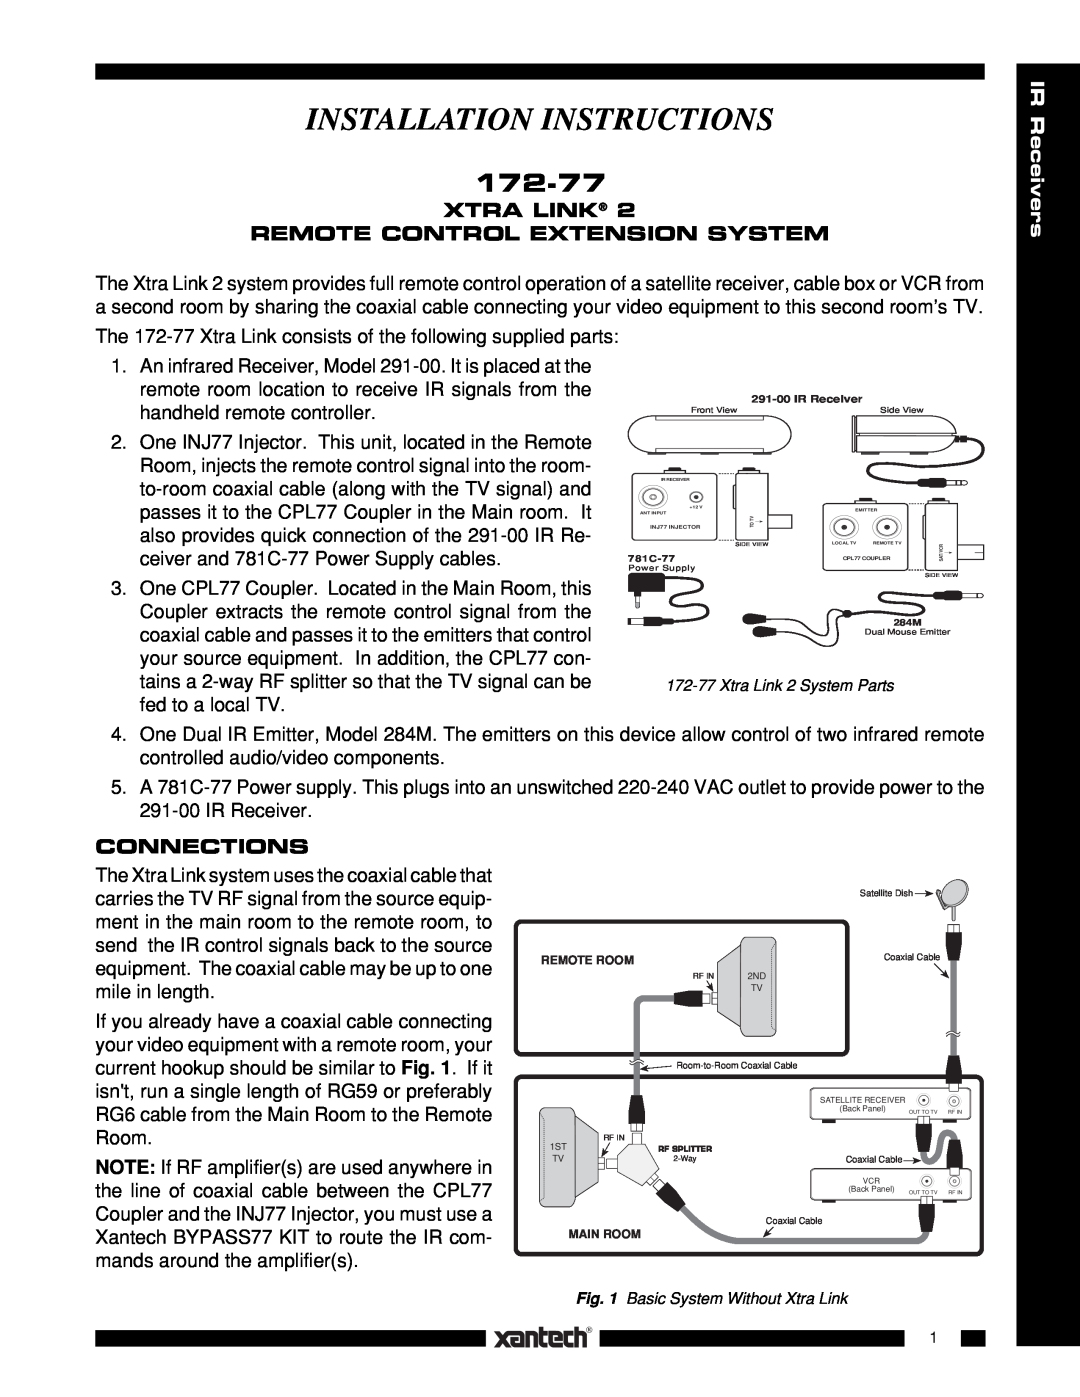 Xantech 172-77 installation instructions Xtra Link Remote Control Extension System, Connections, Installation Instructions 